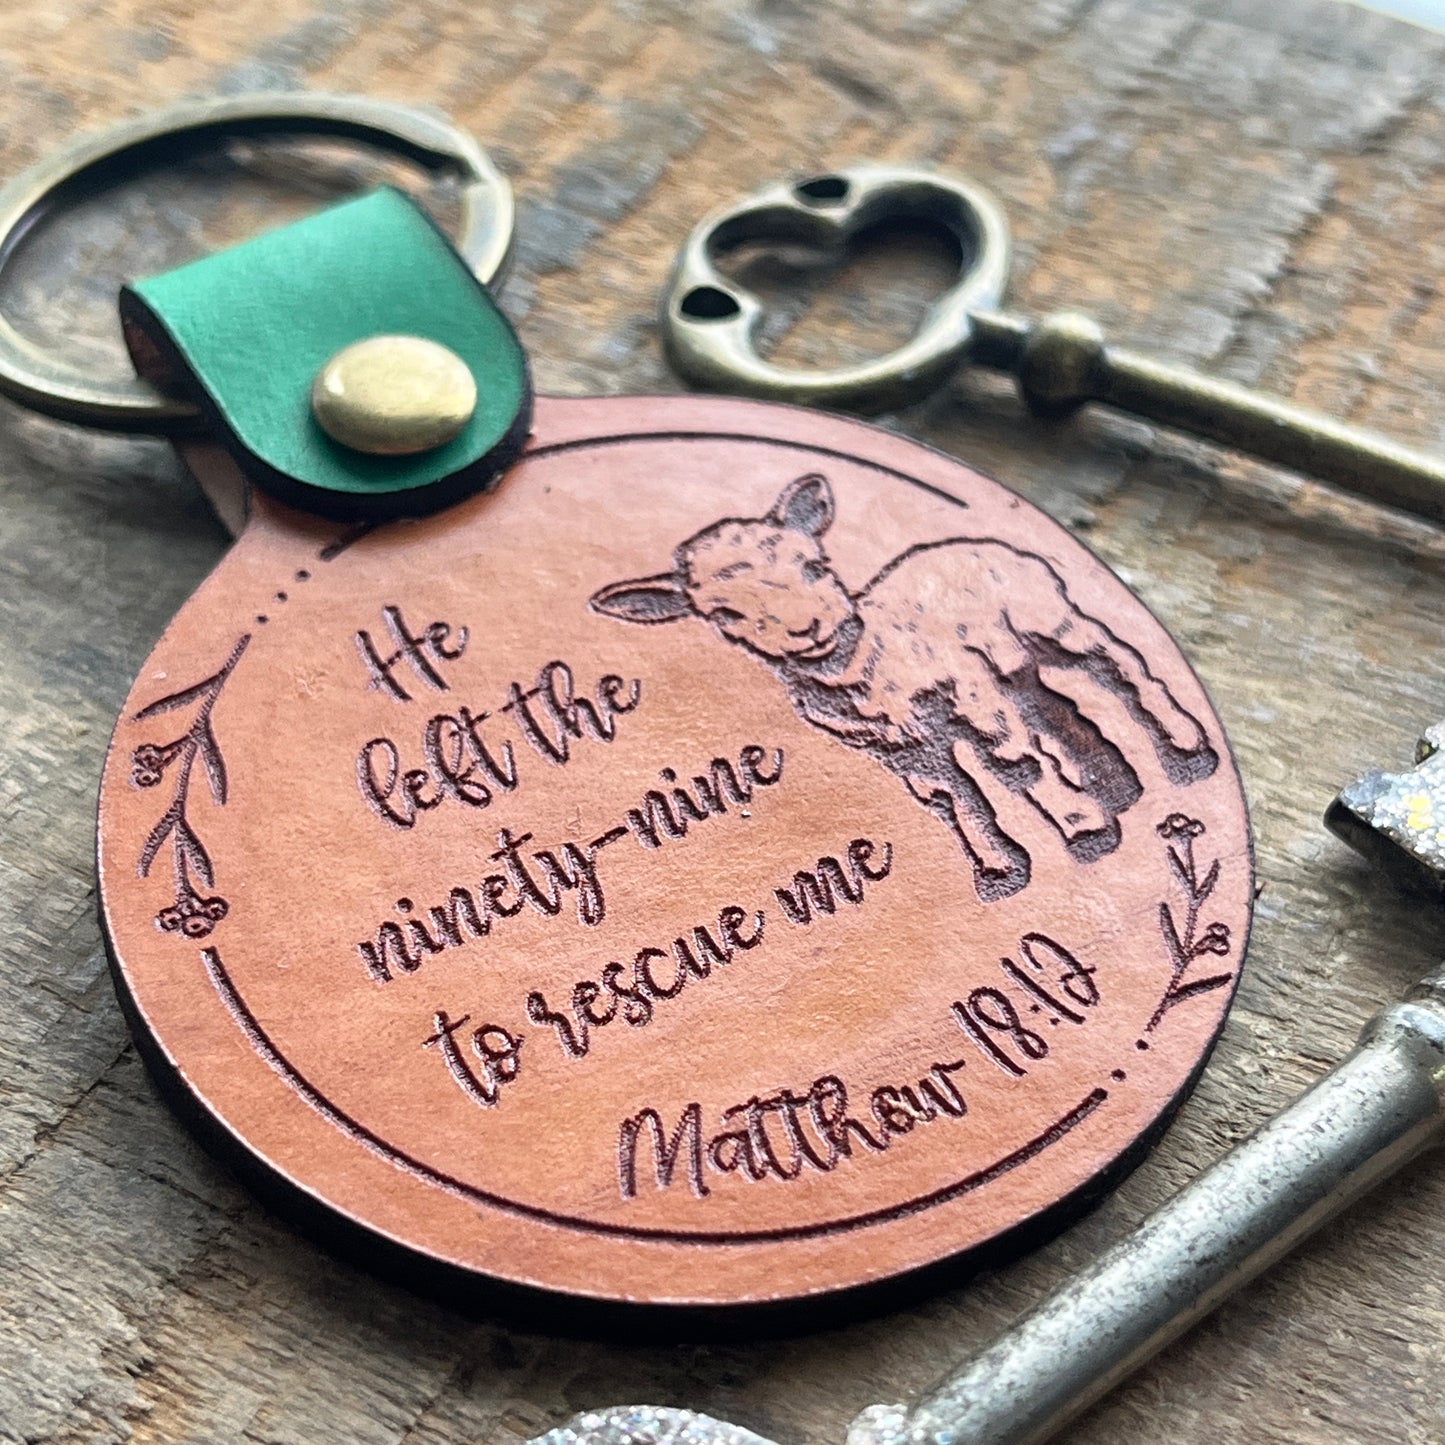 Engraved Leather Scripture Keychain, He Left the 99 to Rescue Me Bible Verse Gifts, Matthew 18